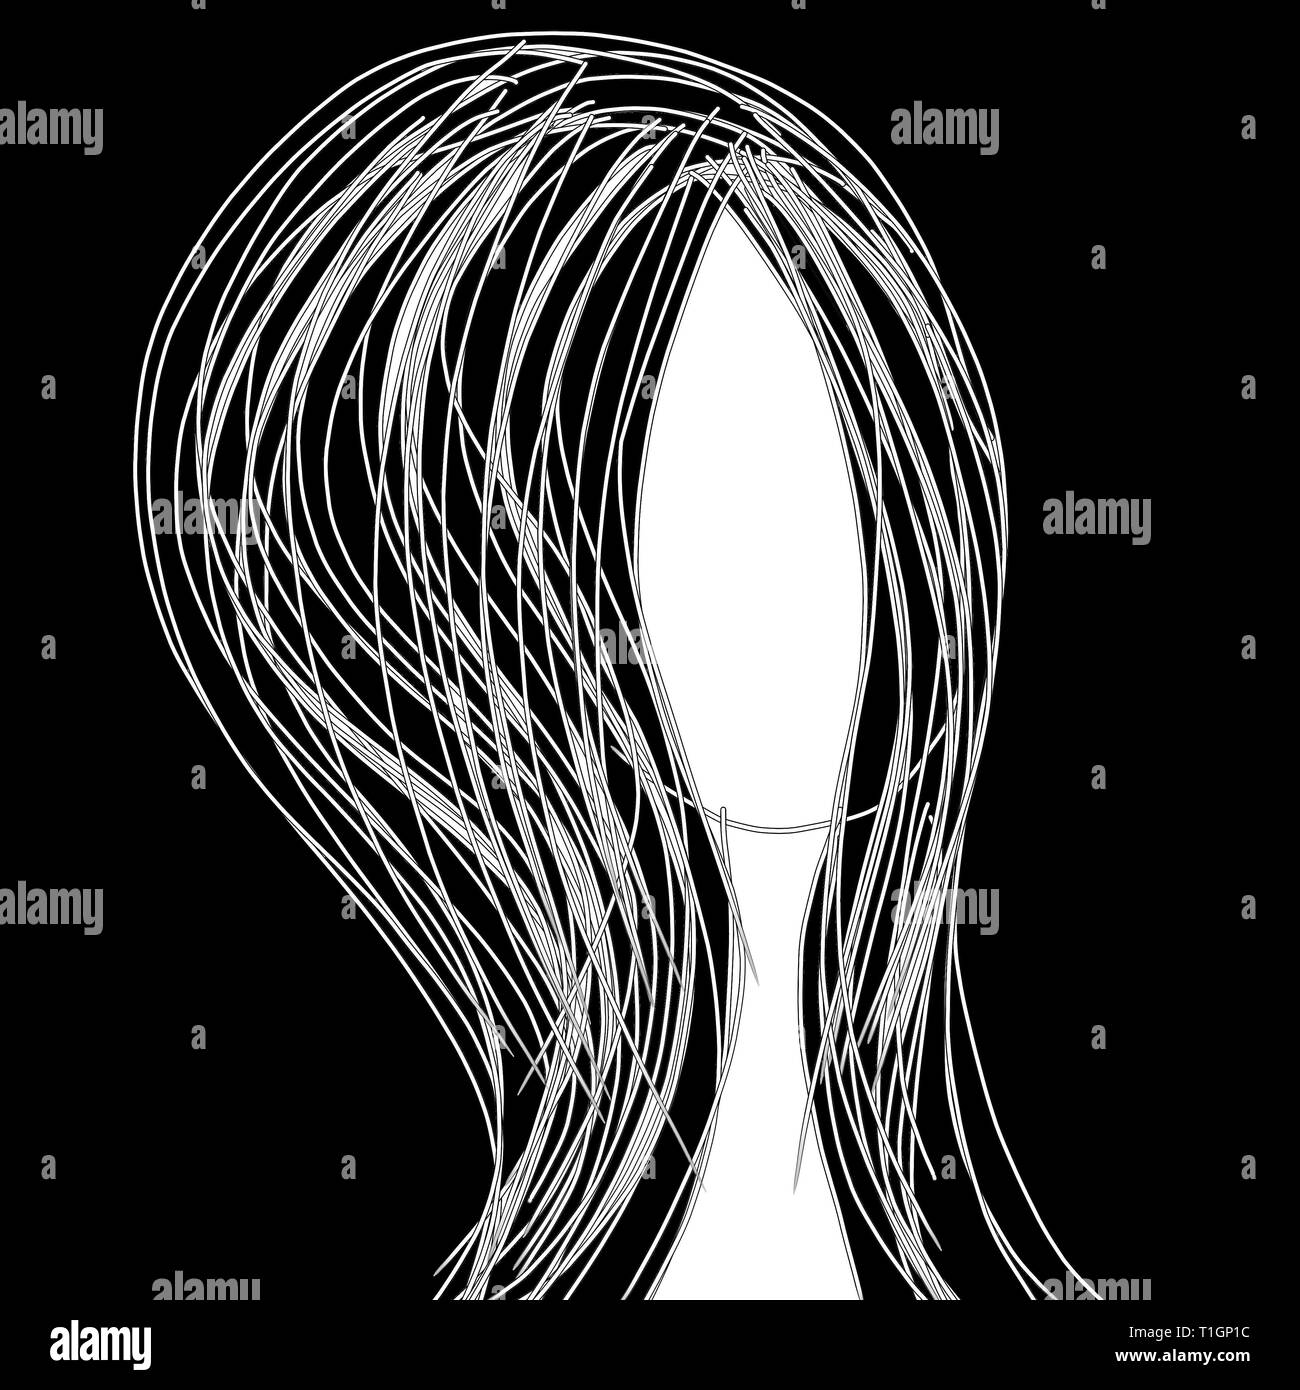 Black and white simple drawing of woman's head Stock Photo